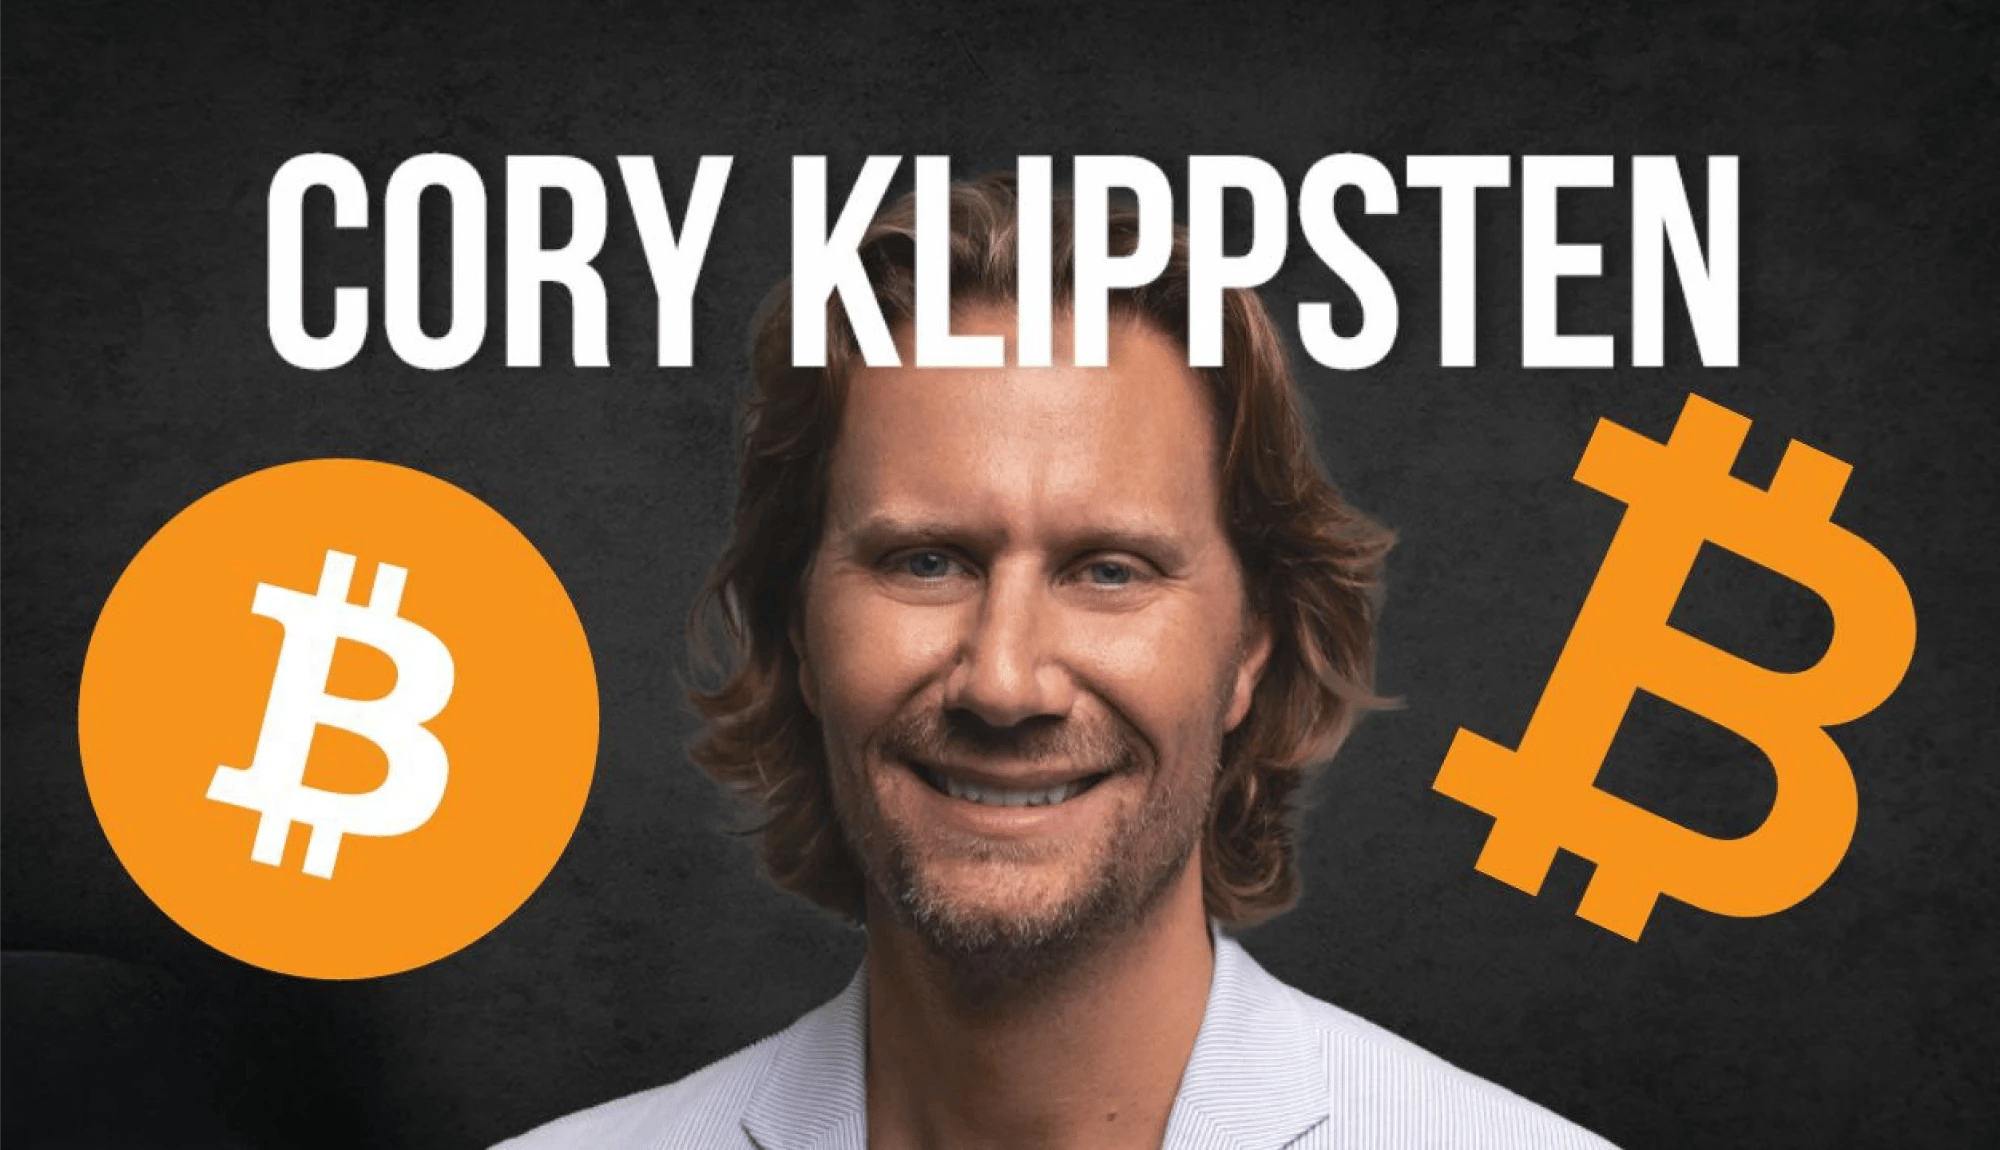 Bitcoin's Top of Funnel is Becoming Less Noisy with the Rise of ETFs, Suggests Swan Bitcoin CEO Cory Klippsten 